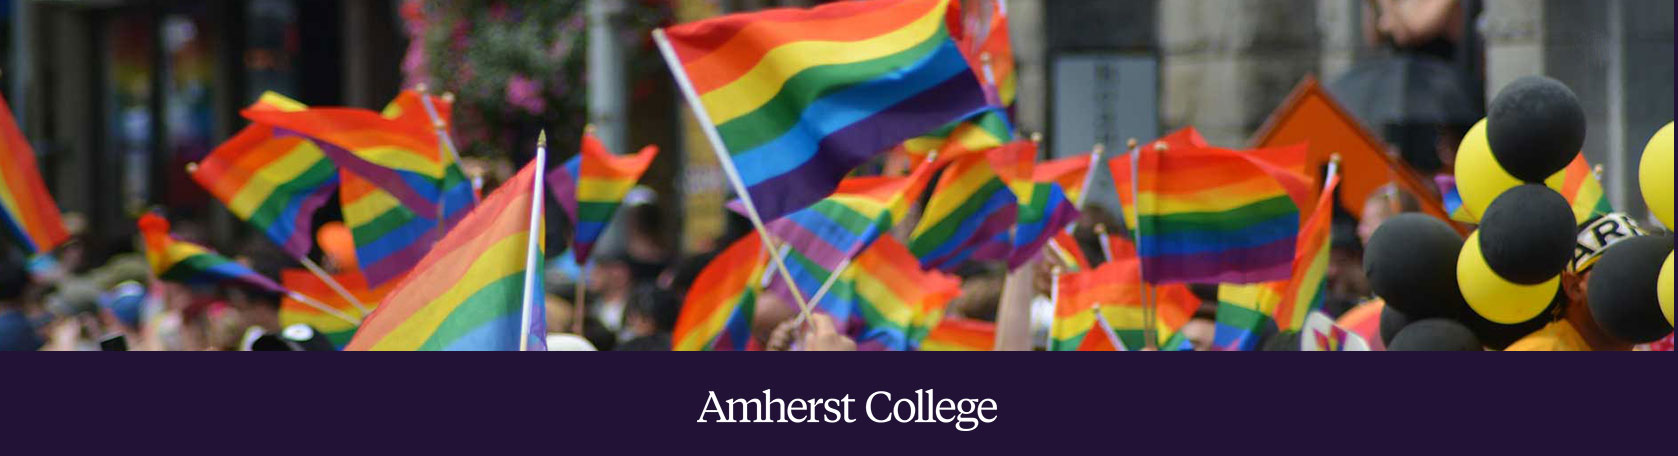 In 1982 a group of Amherst alumni formed the Amherst Gay and Lesbian Alumni Group known as GALA